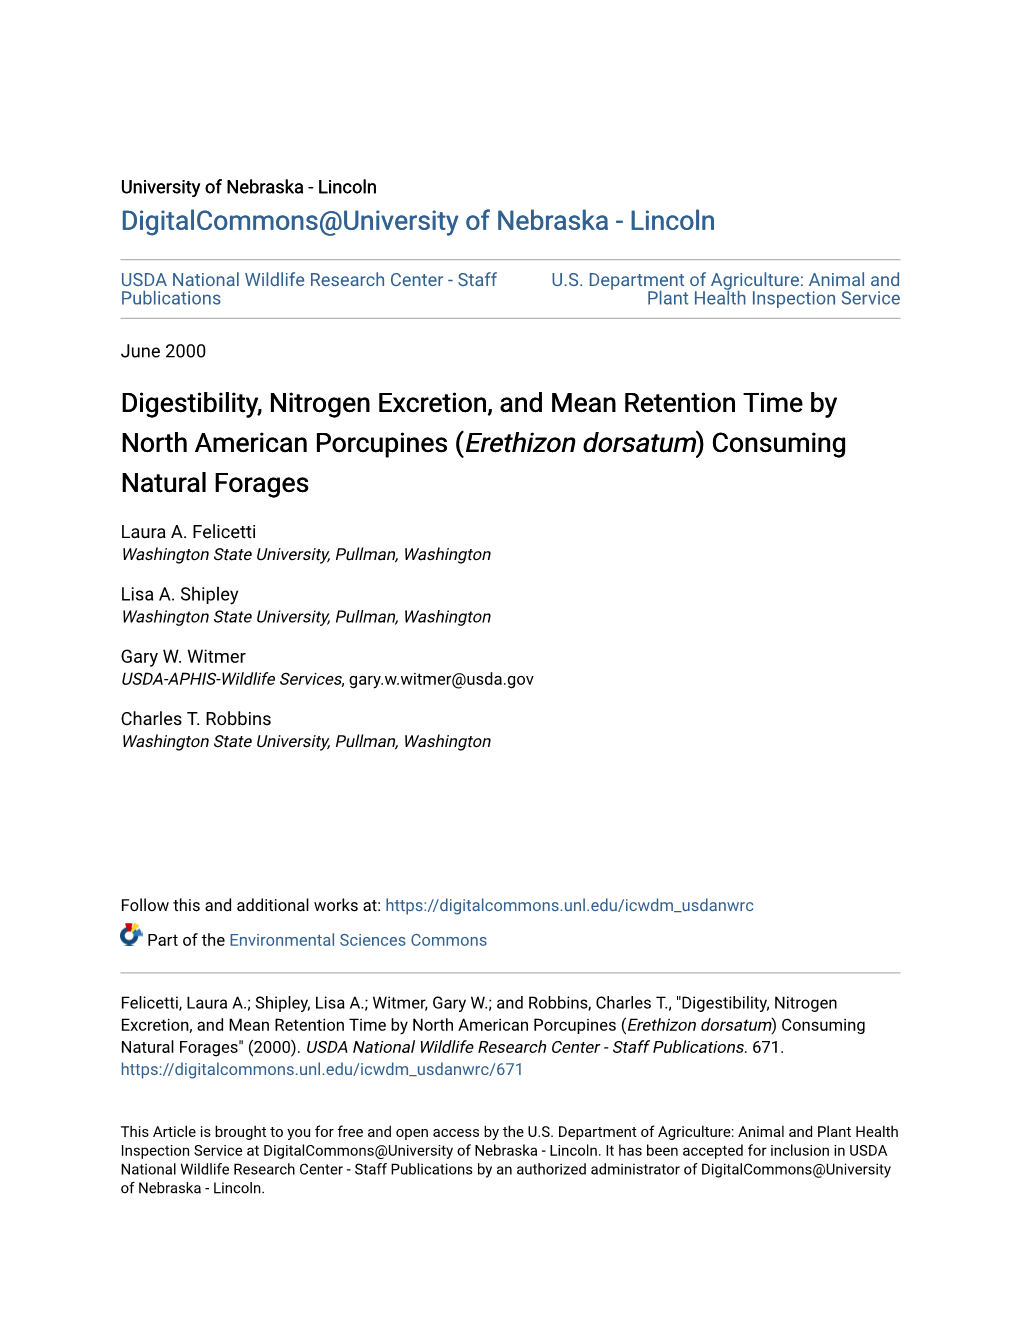 Digestibility, Nitrogen Excretion, and Mean Retention Time by North American Porcupines (Erethizon Dorsatum) Consuming Natural Forages